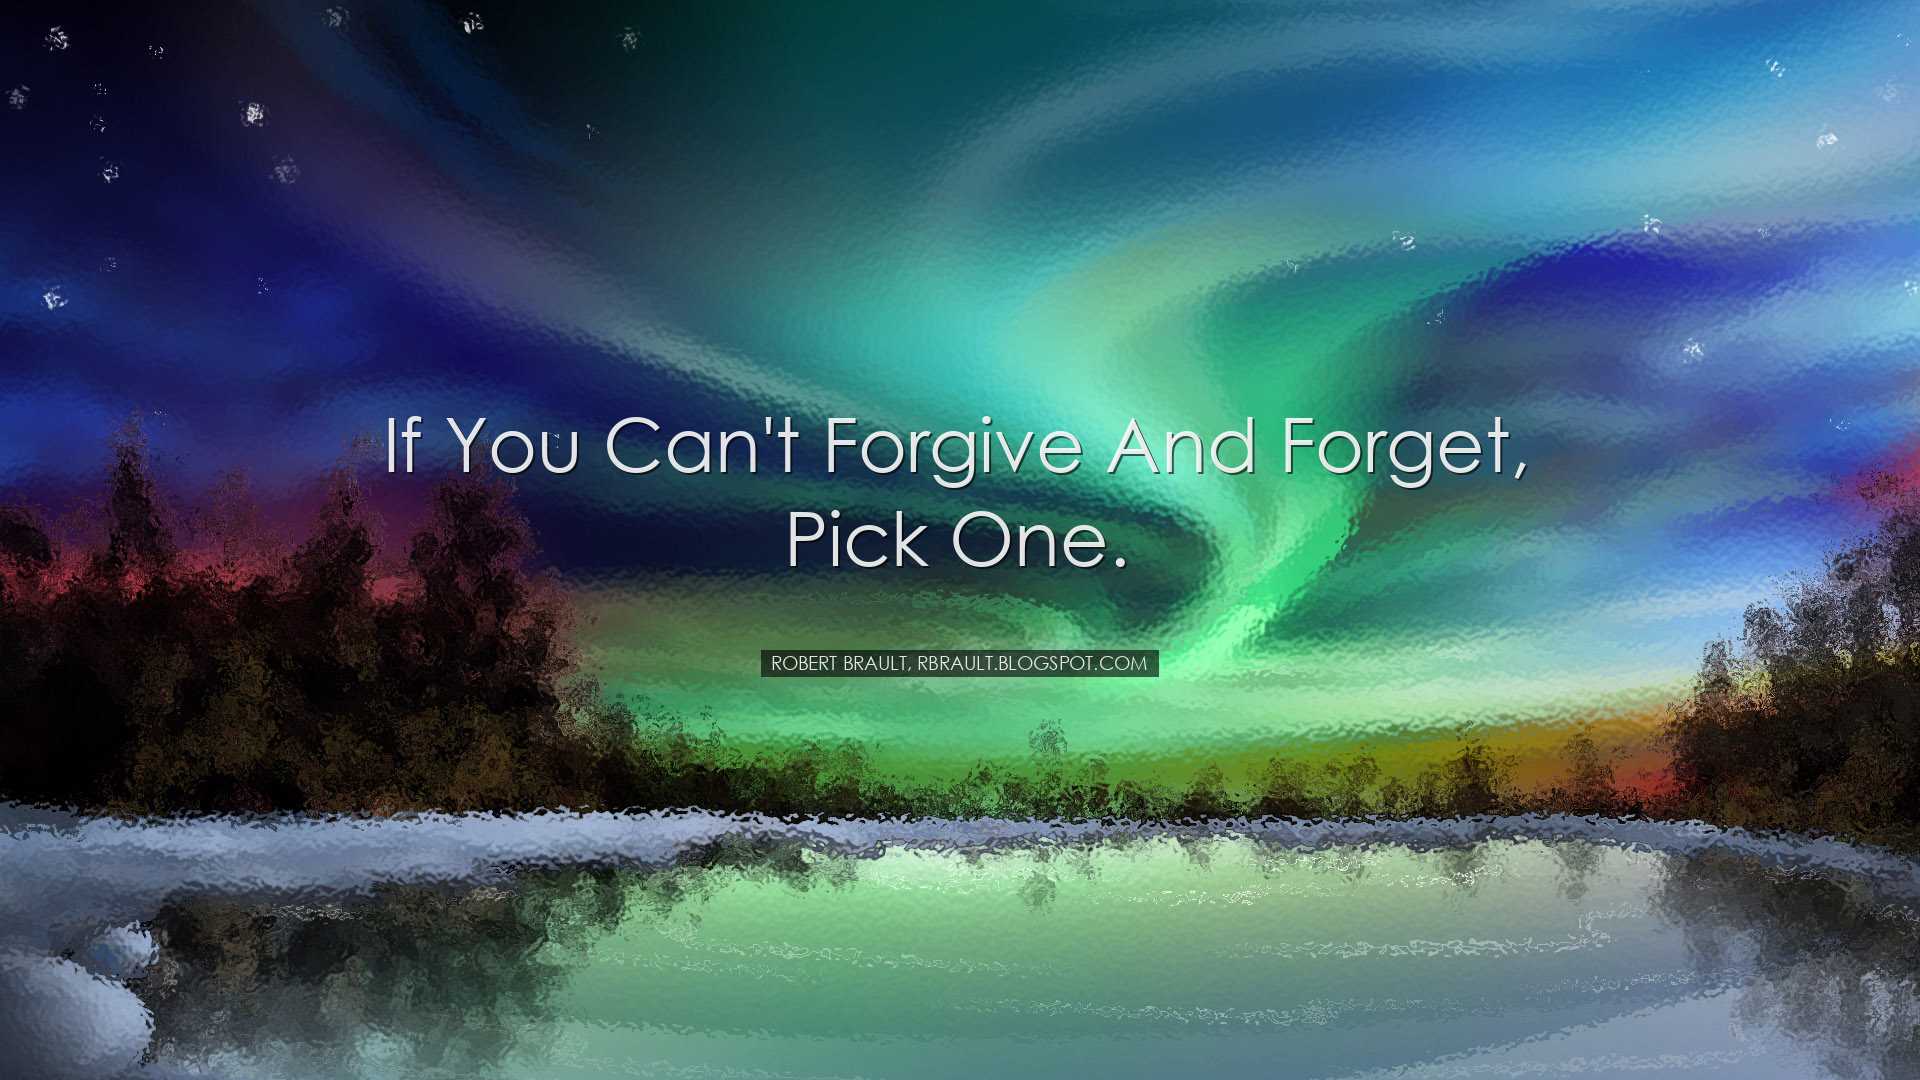 If you can't forgive and forget, pick one. - Robert Brault, rbraul